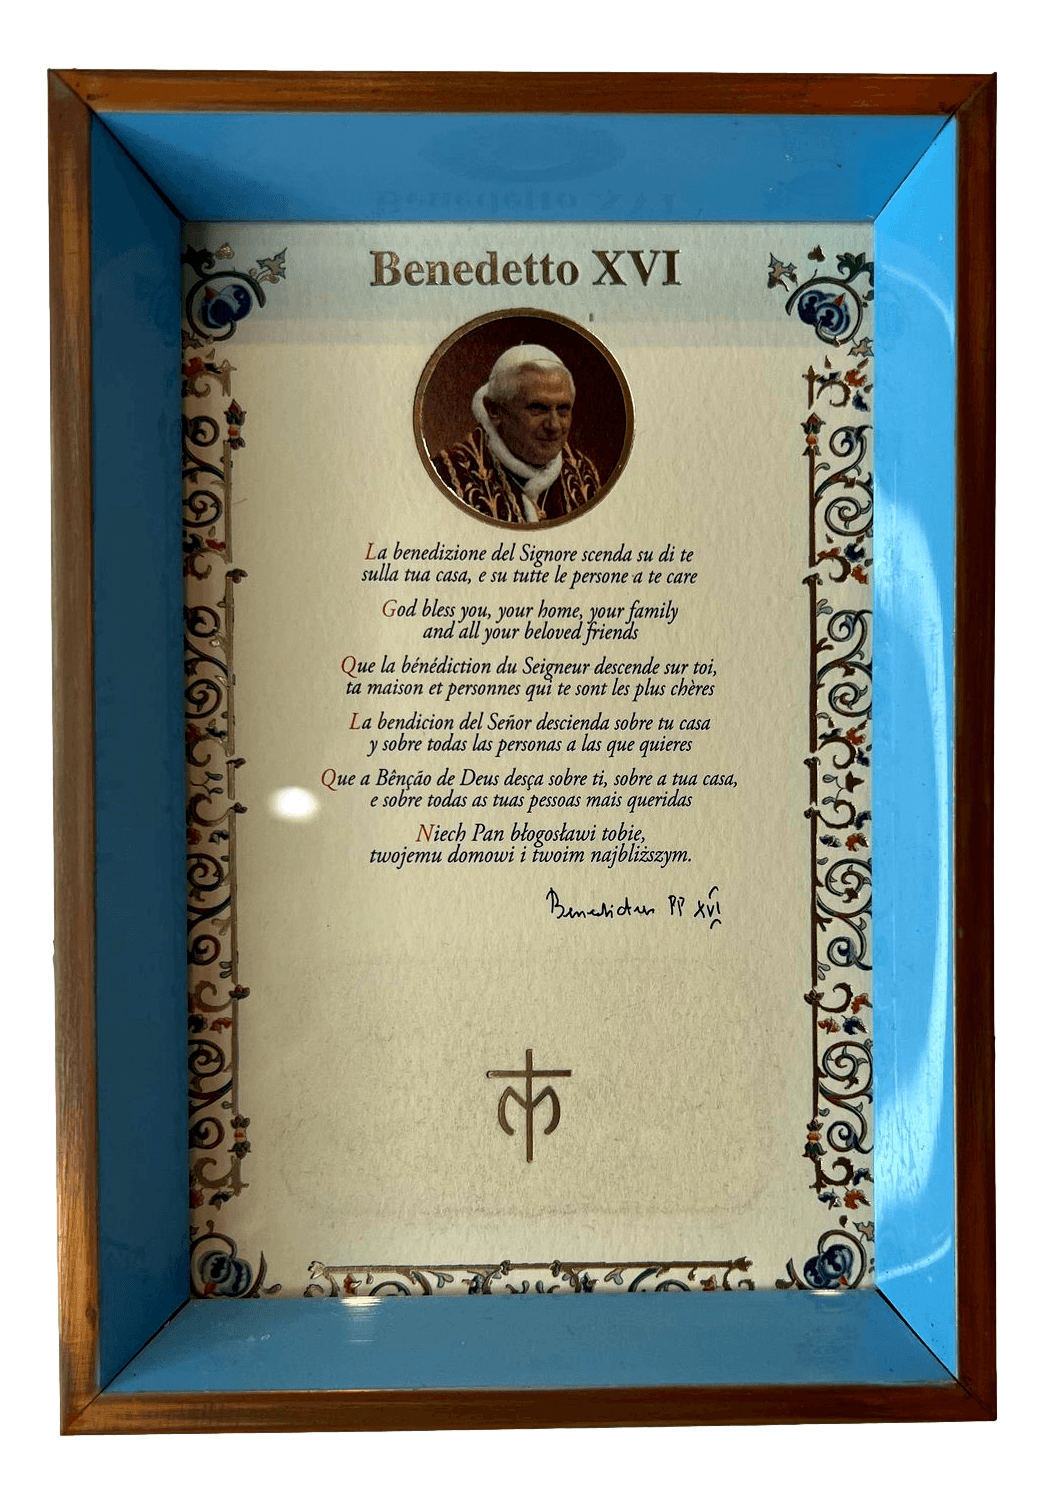 Framed Art Pope Benedetto XVI Home Blessing in Multiple Languages Printed on Linen Paper Tabletop L:6.5 x W: 4.5 inches - Ysleta Mission Gift Shop- VOTED El Paso's Best Gift Shop